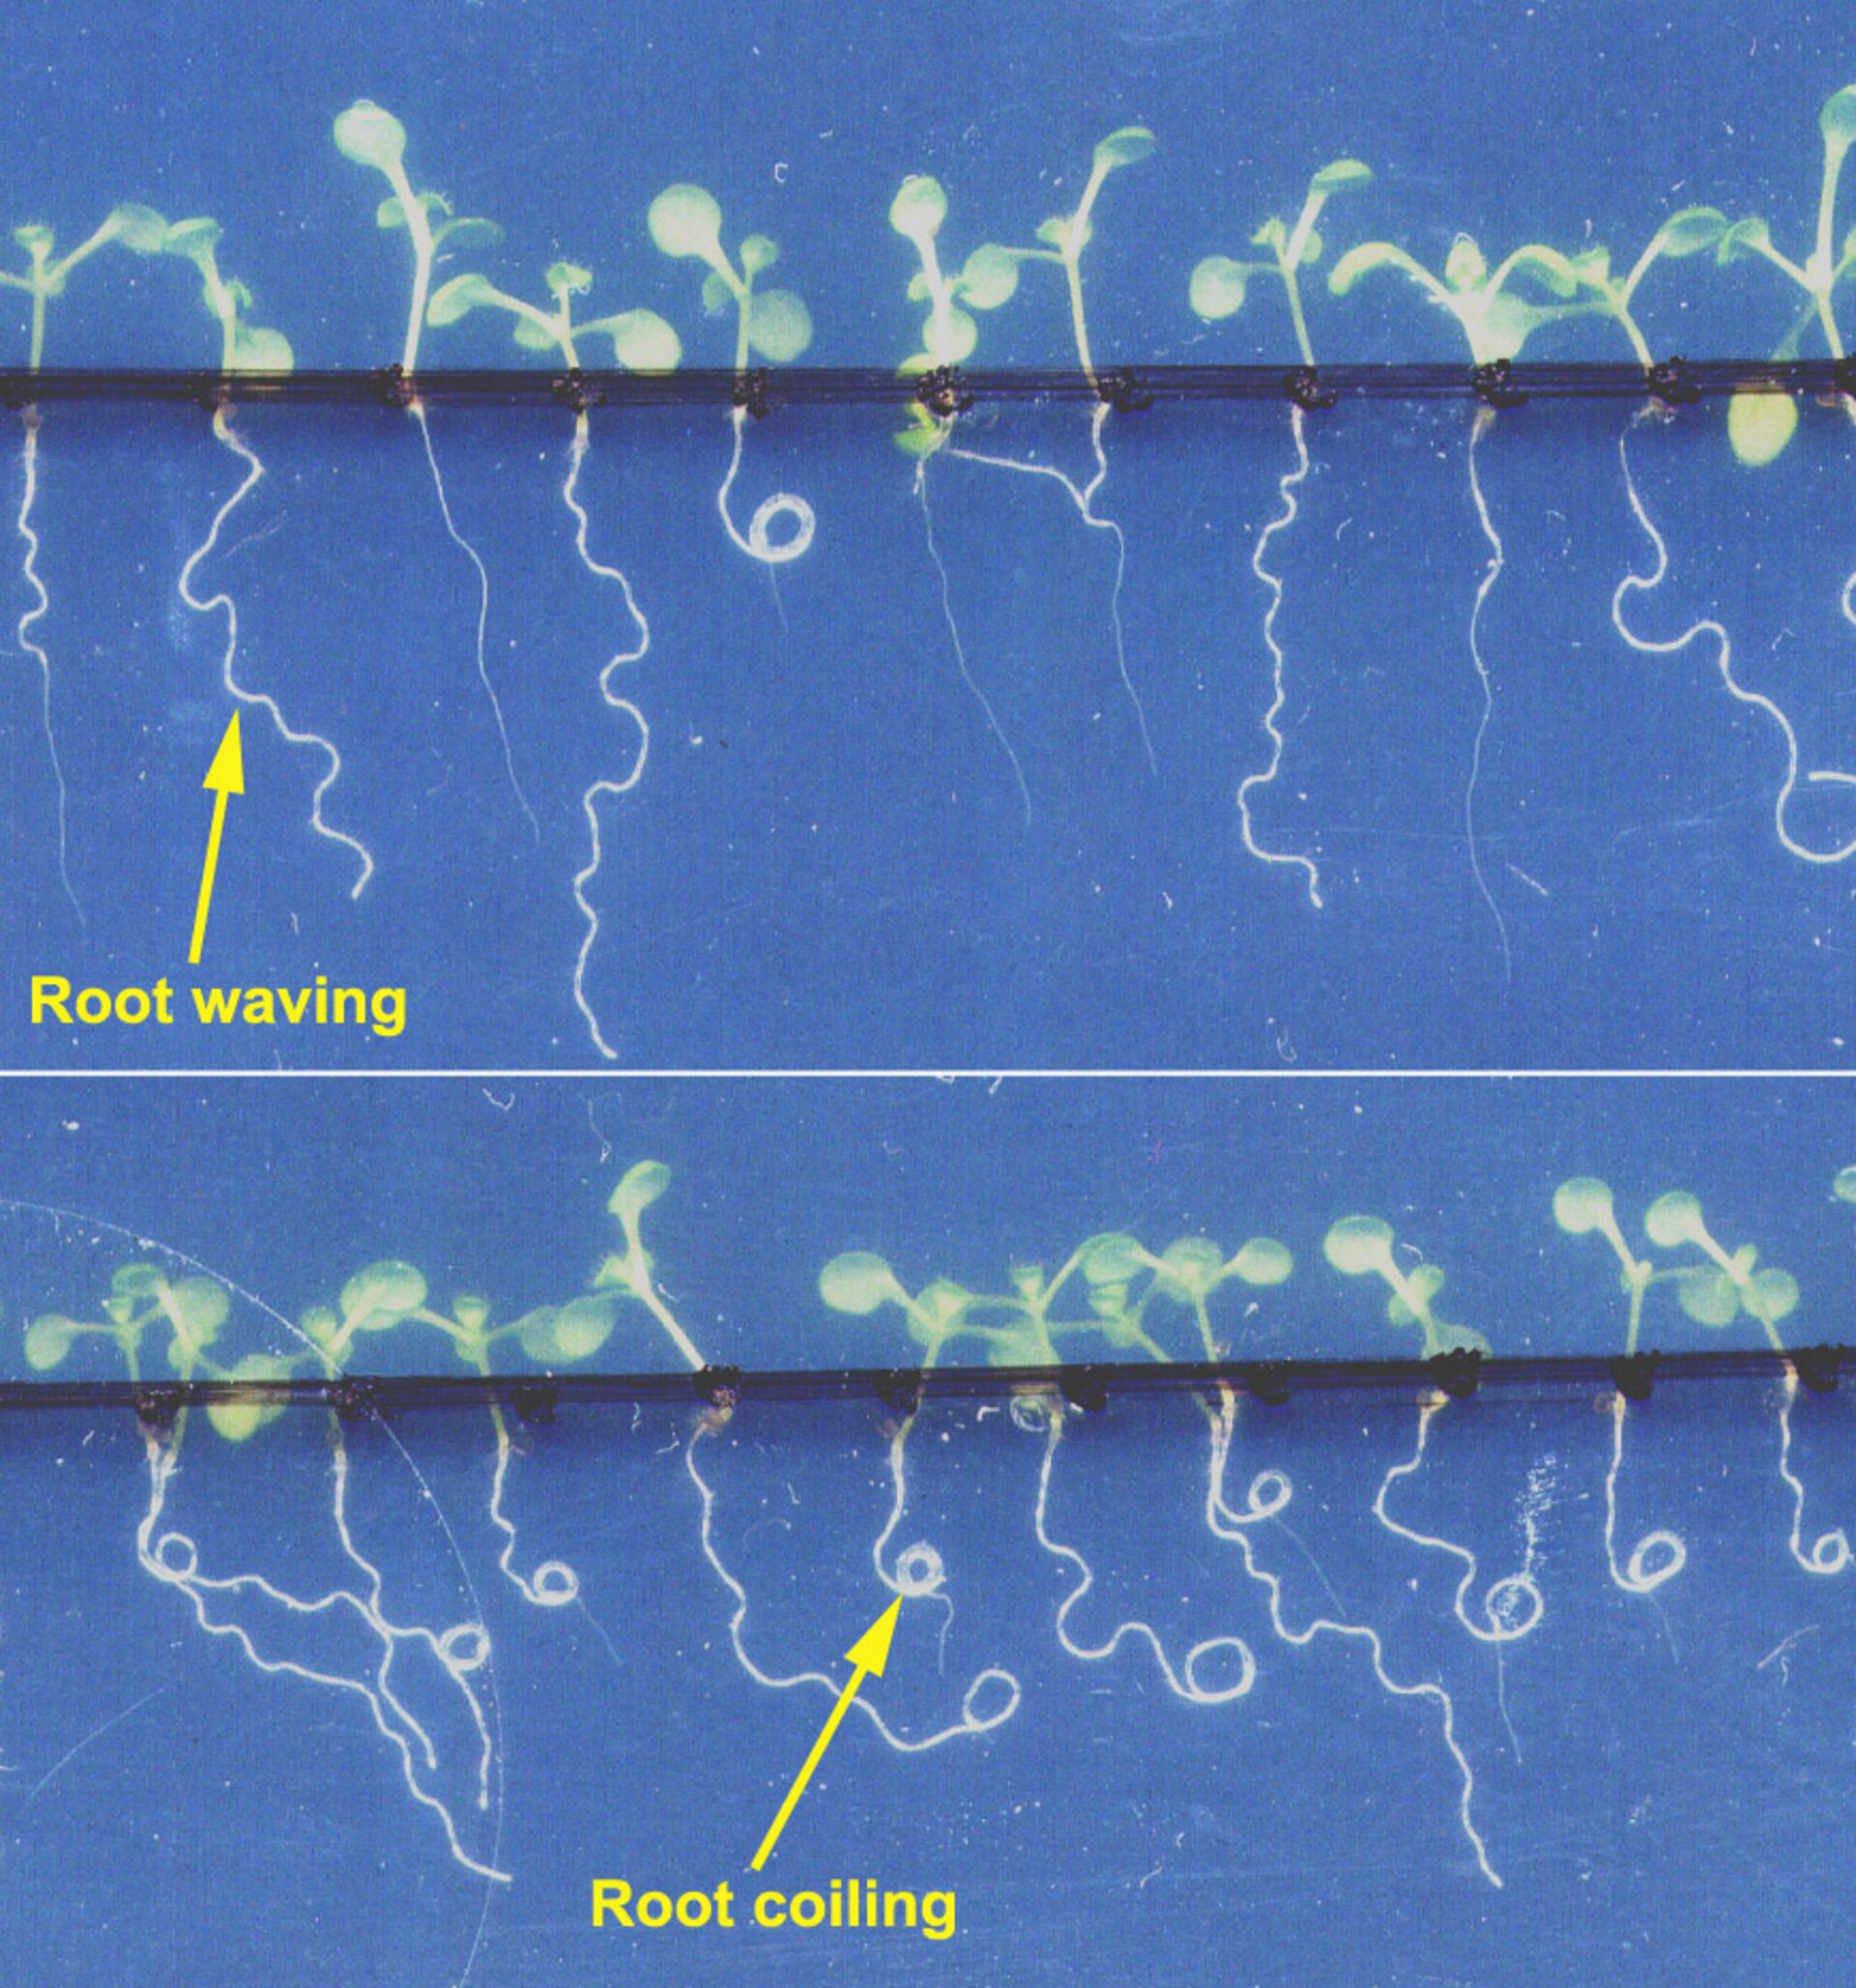 WAICO investigates root waving and coiling in Arabidopsis seedlings